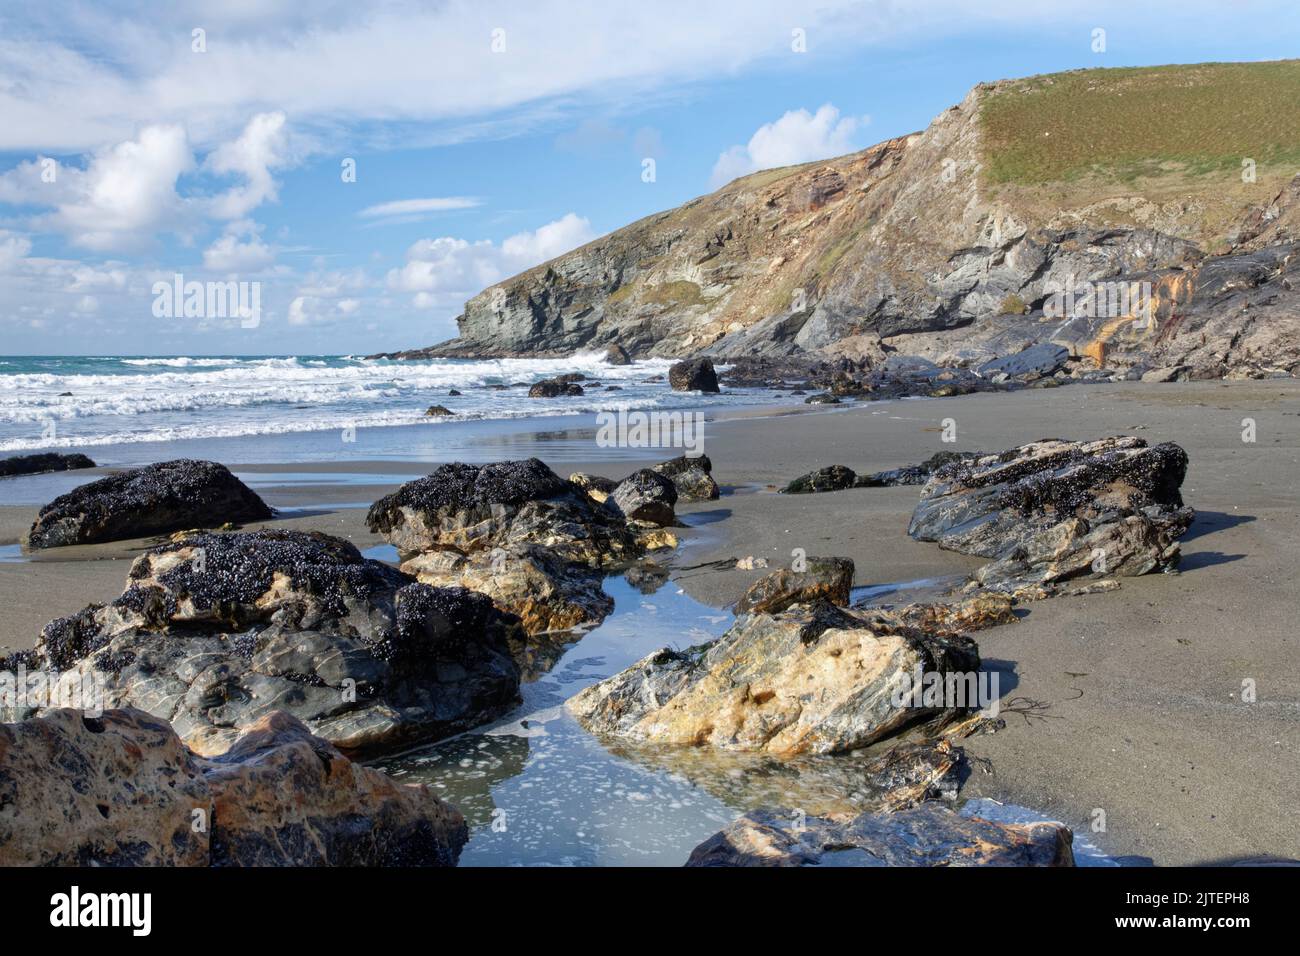 Common mussels (Mytilus edulis) covering rocks exposed on a falling tide on a remote, exposed shoreline, Tregardock Beach, near Delabole, Cornwall, UK Stock Photo